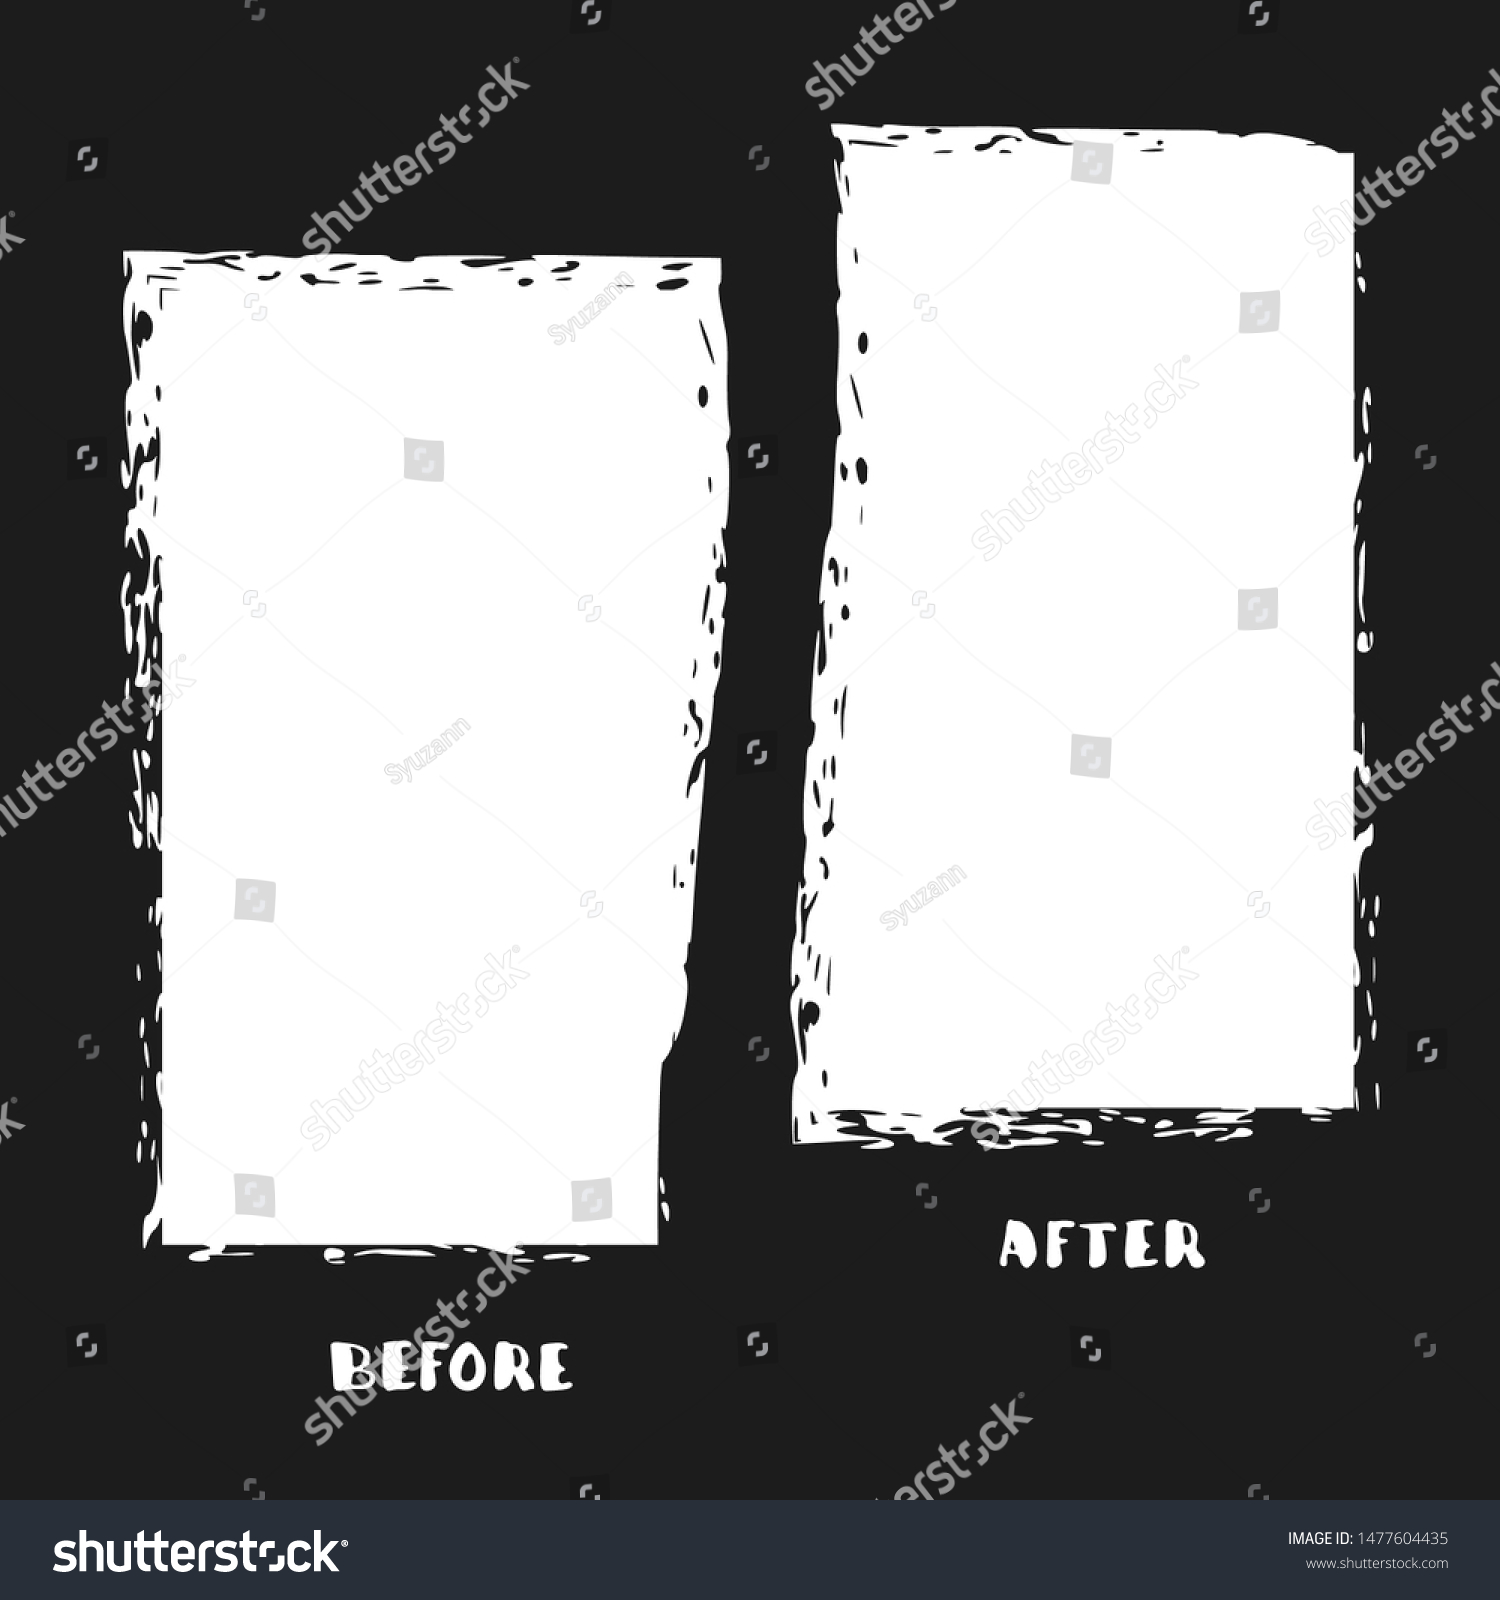 Before After Template Comparison Banner Copy Stock Vector Royalty Free